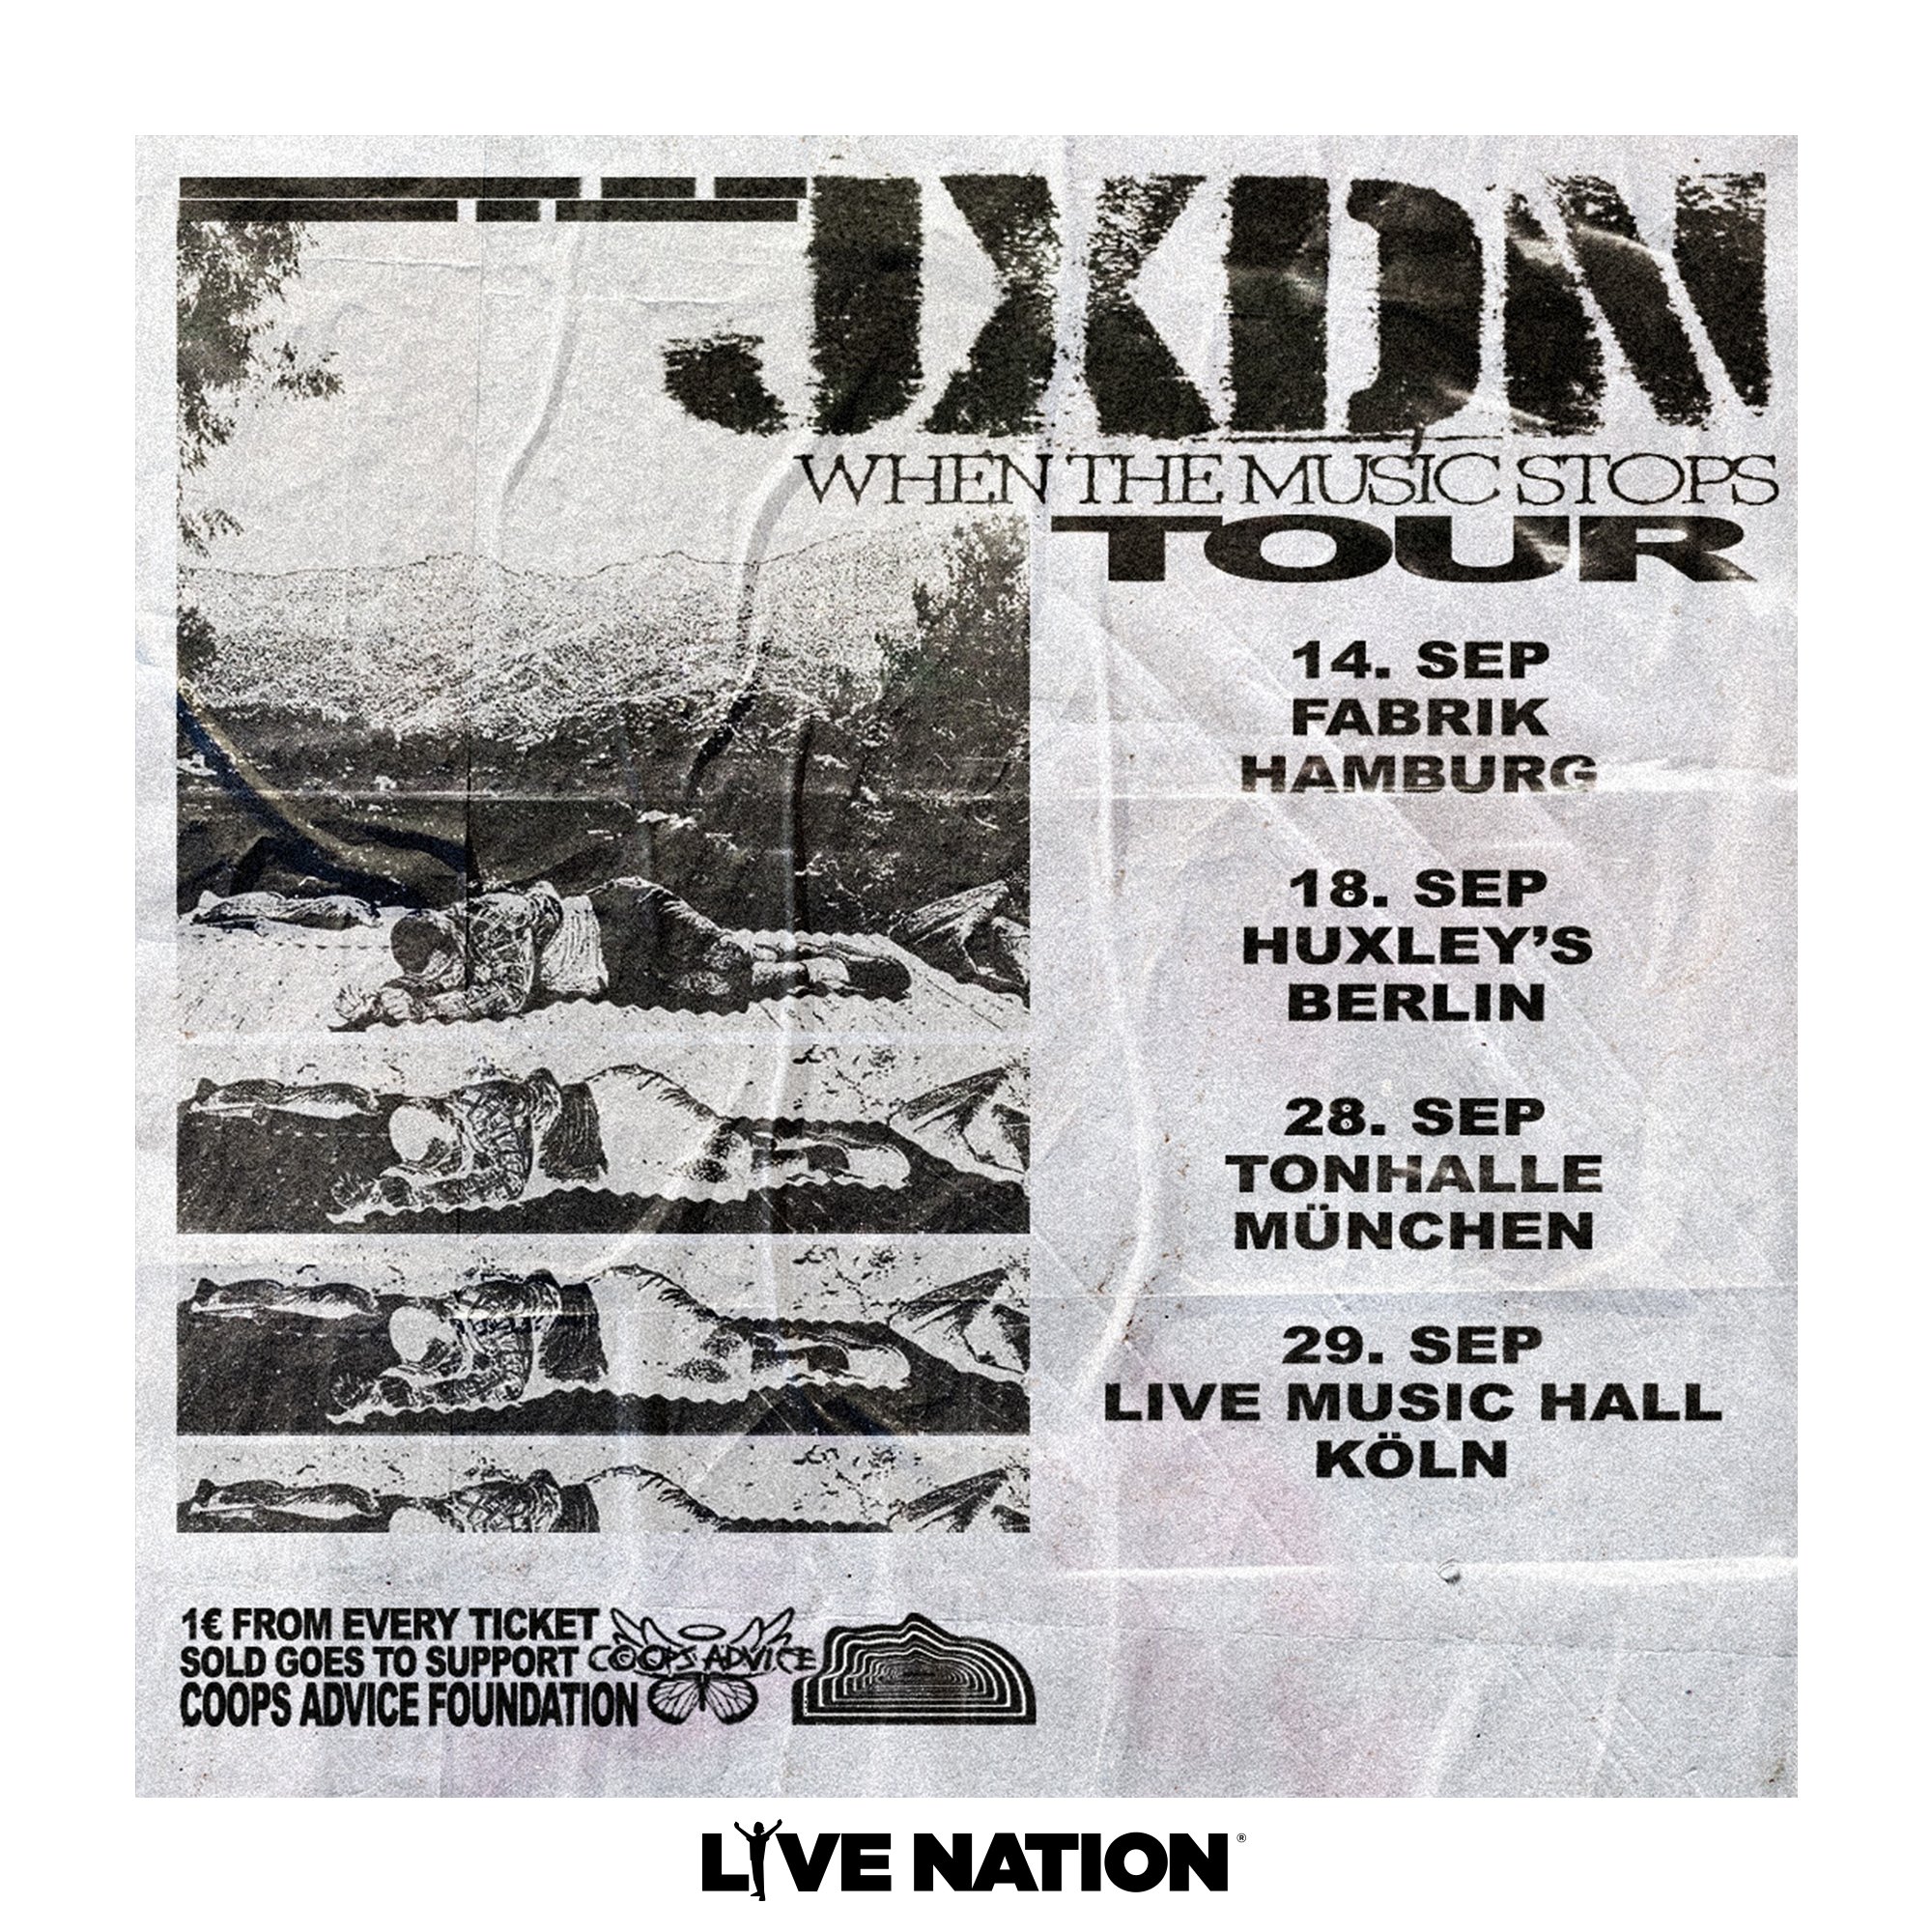 Billets Jxdn - When The Music Stops Tour (Live Music Hall - Cologne)